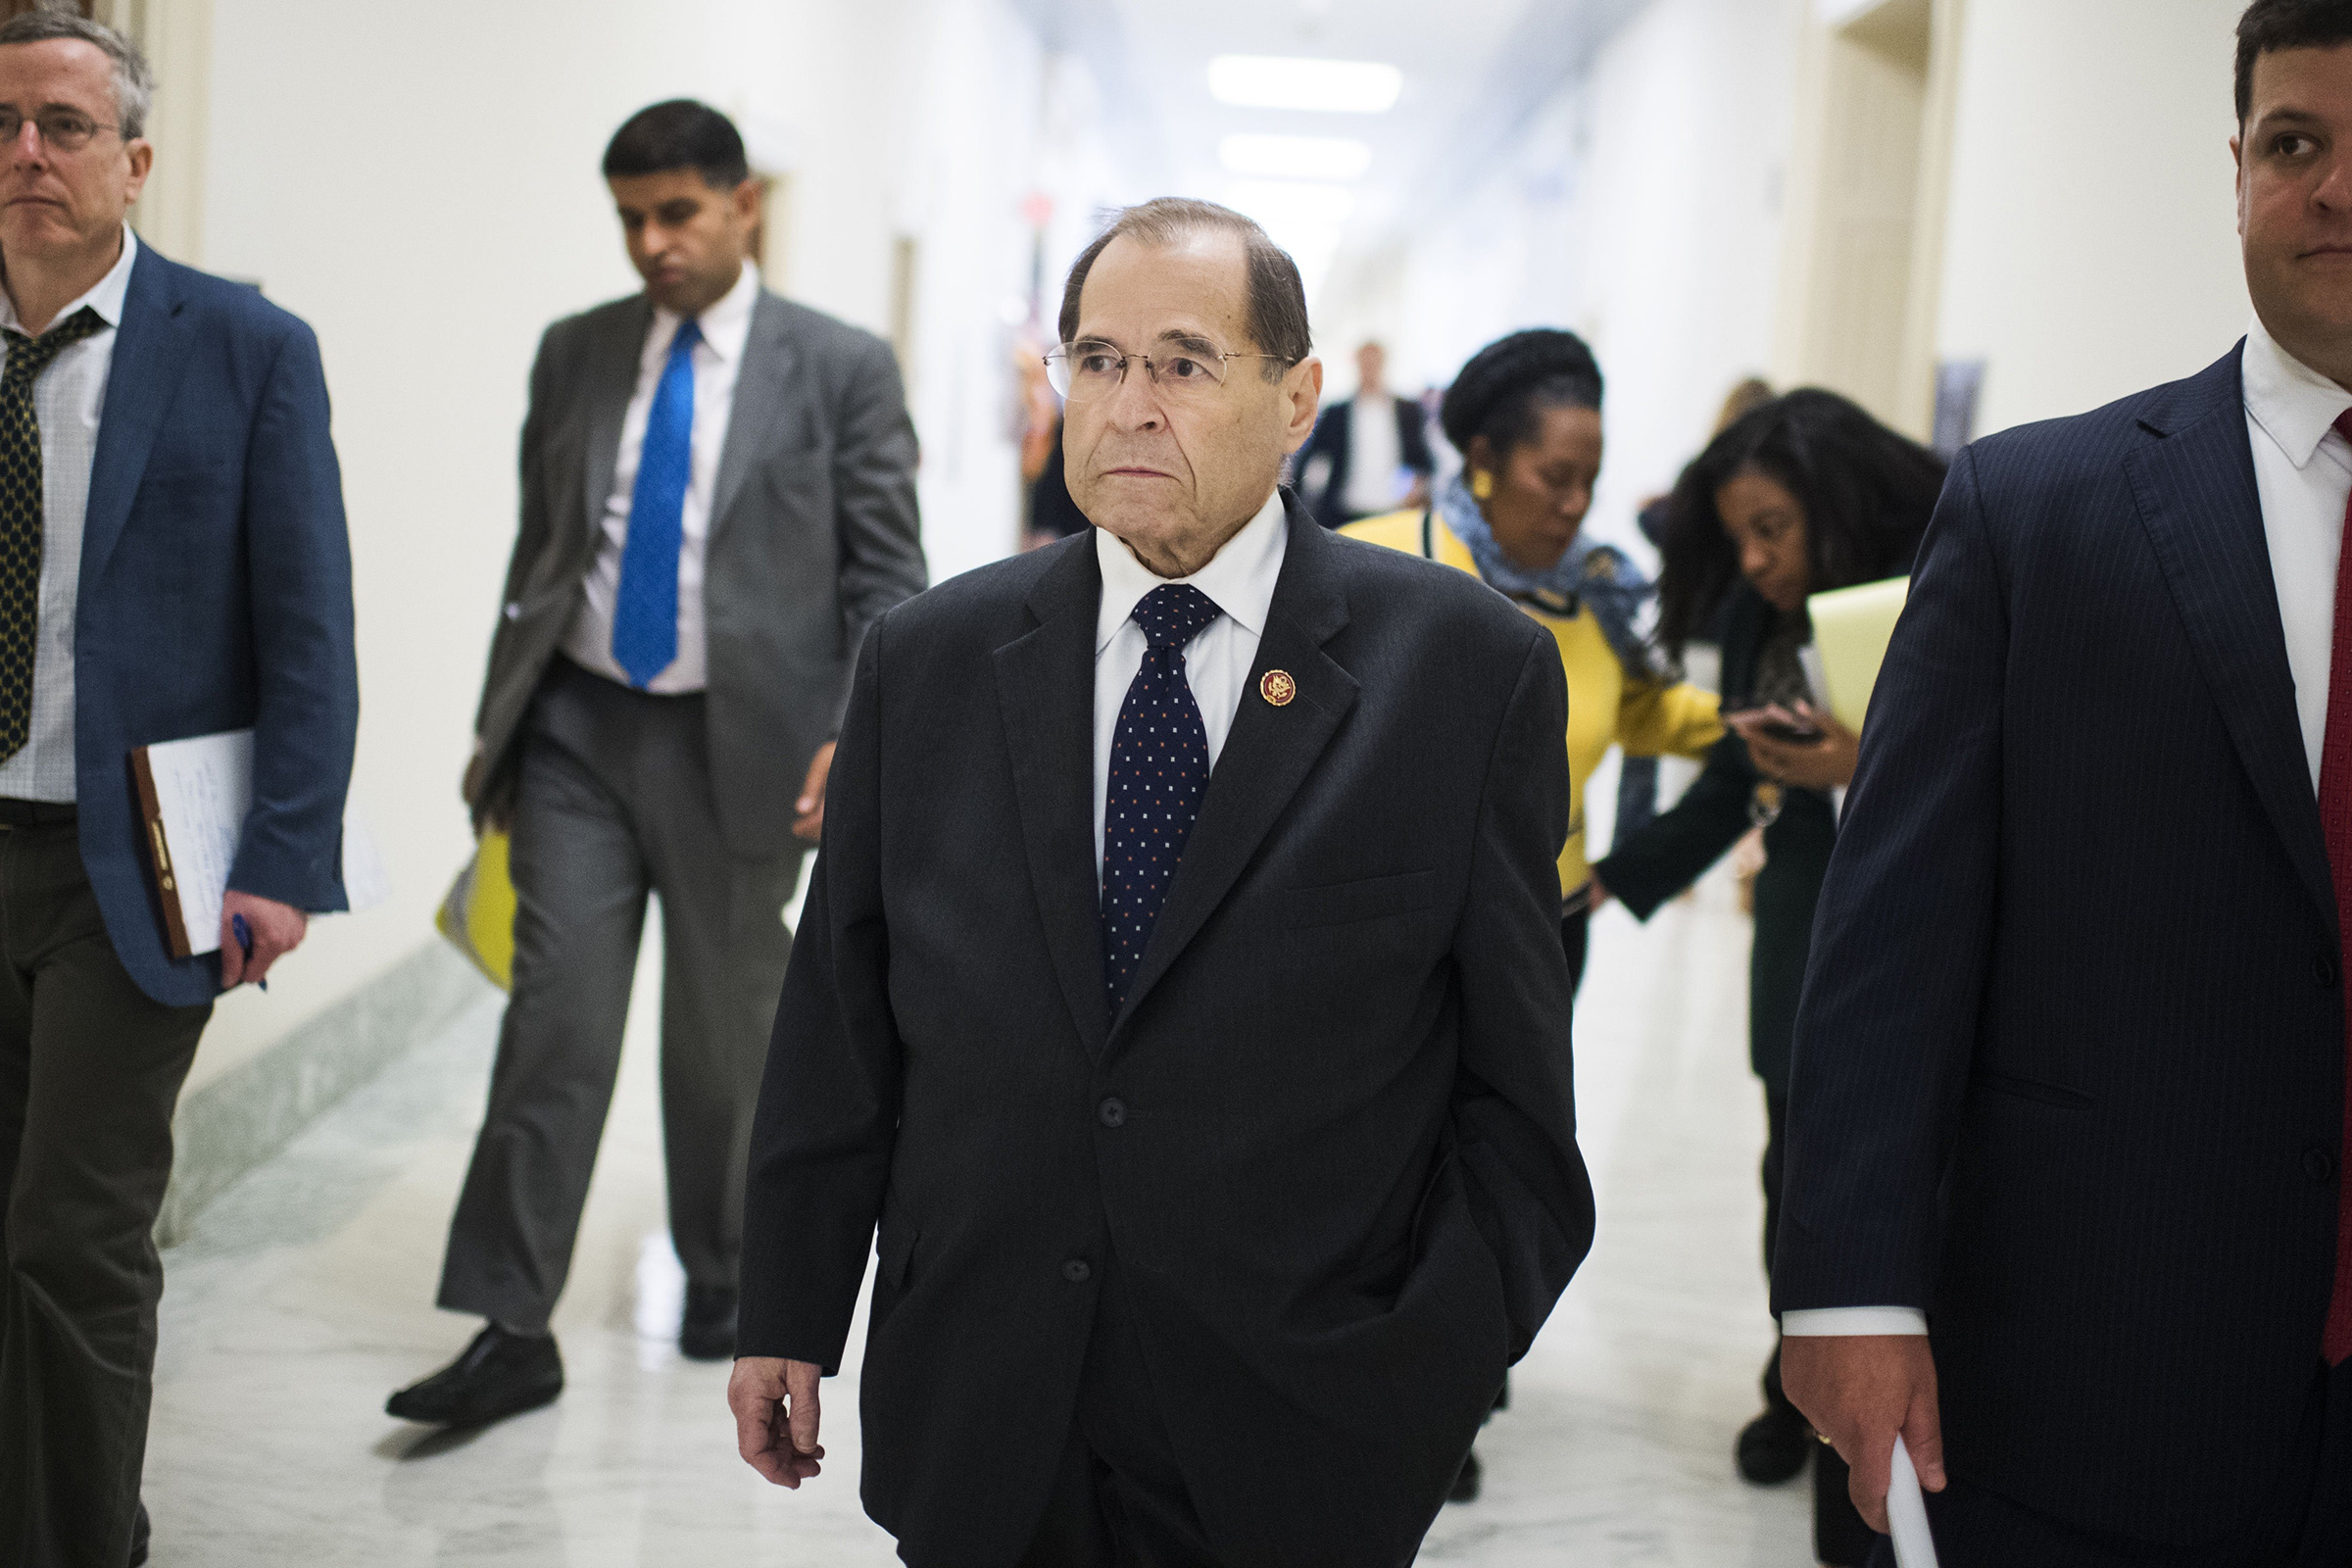 Chairman Jerrold Nadler, D-N.Y., is seen after a House Judiciary Committee hearing in Rayburn Building, Washington, D.C. on May 2, 2019. (Tom Williams—Congressional Quarterly/Newscom/ZUMA Press)